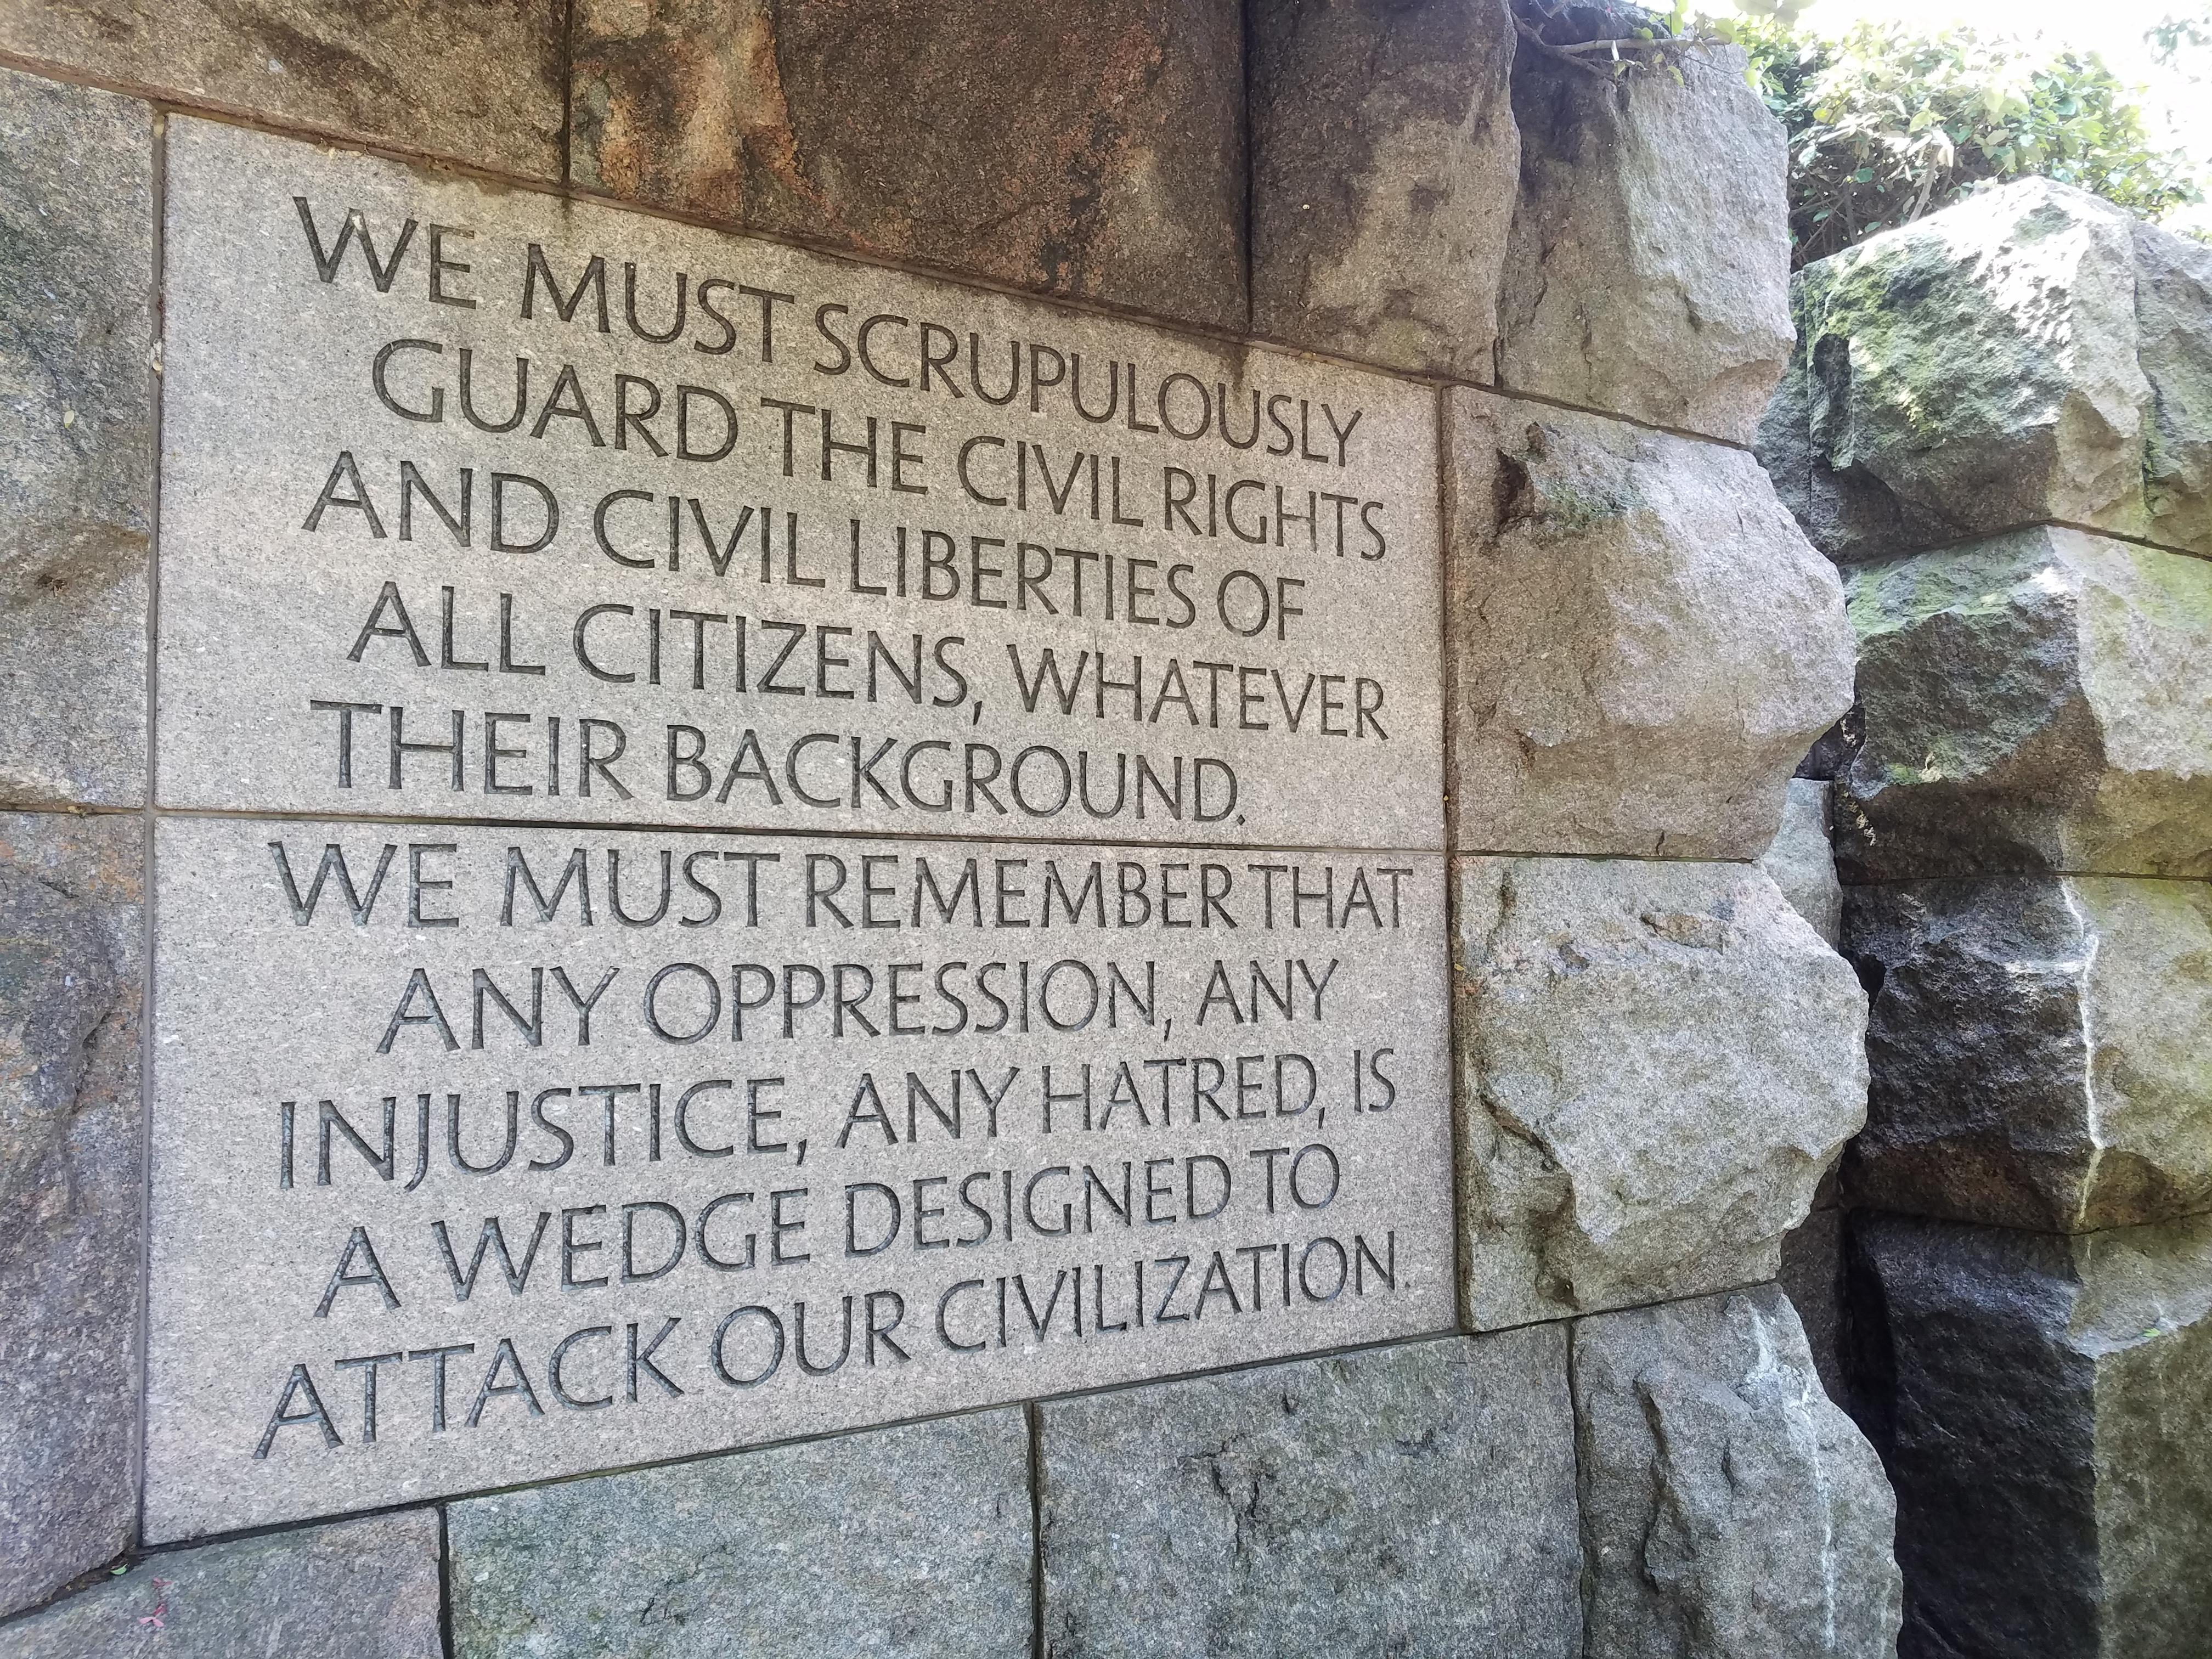 fdr memorial - We Must Scrupulously Guard The Civil Rights And Civil Liberties Of All Citizens, Whatever Their Background. We Must Remember That Any Oppression, Any Injustice, Any Hatred, Is A Wedge Designed To Attack Our Civilization